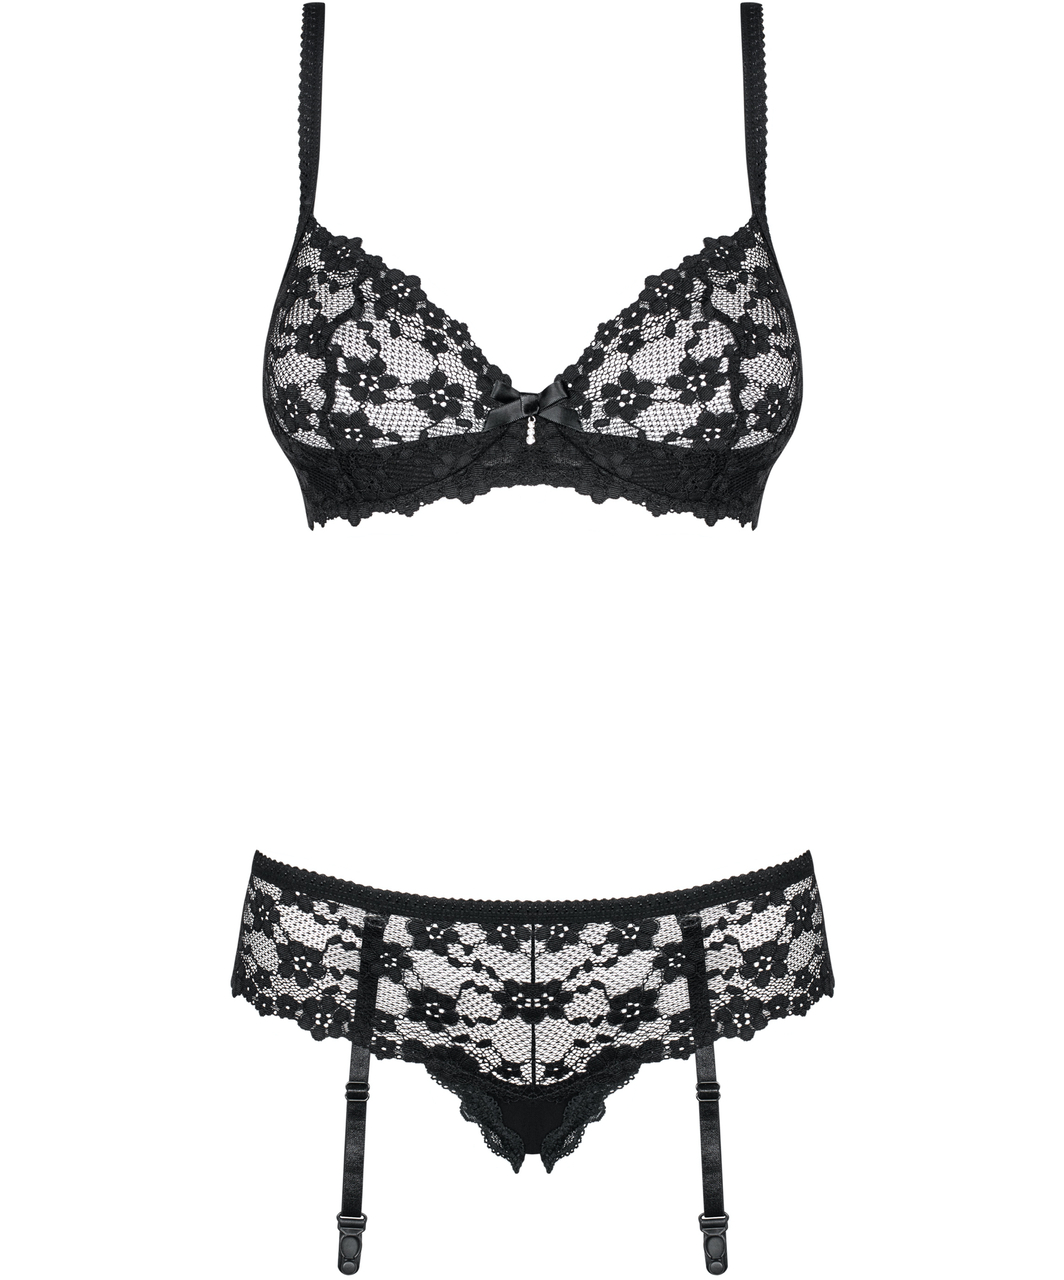 Obsessive black lace lingerie set with garters